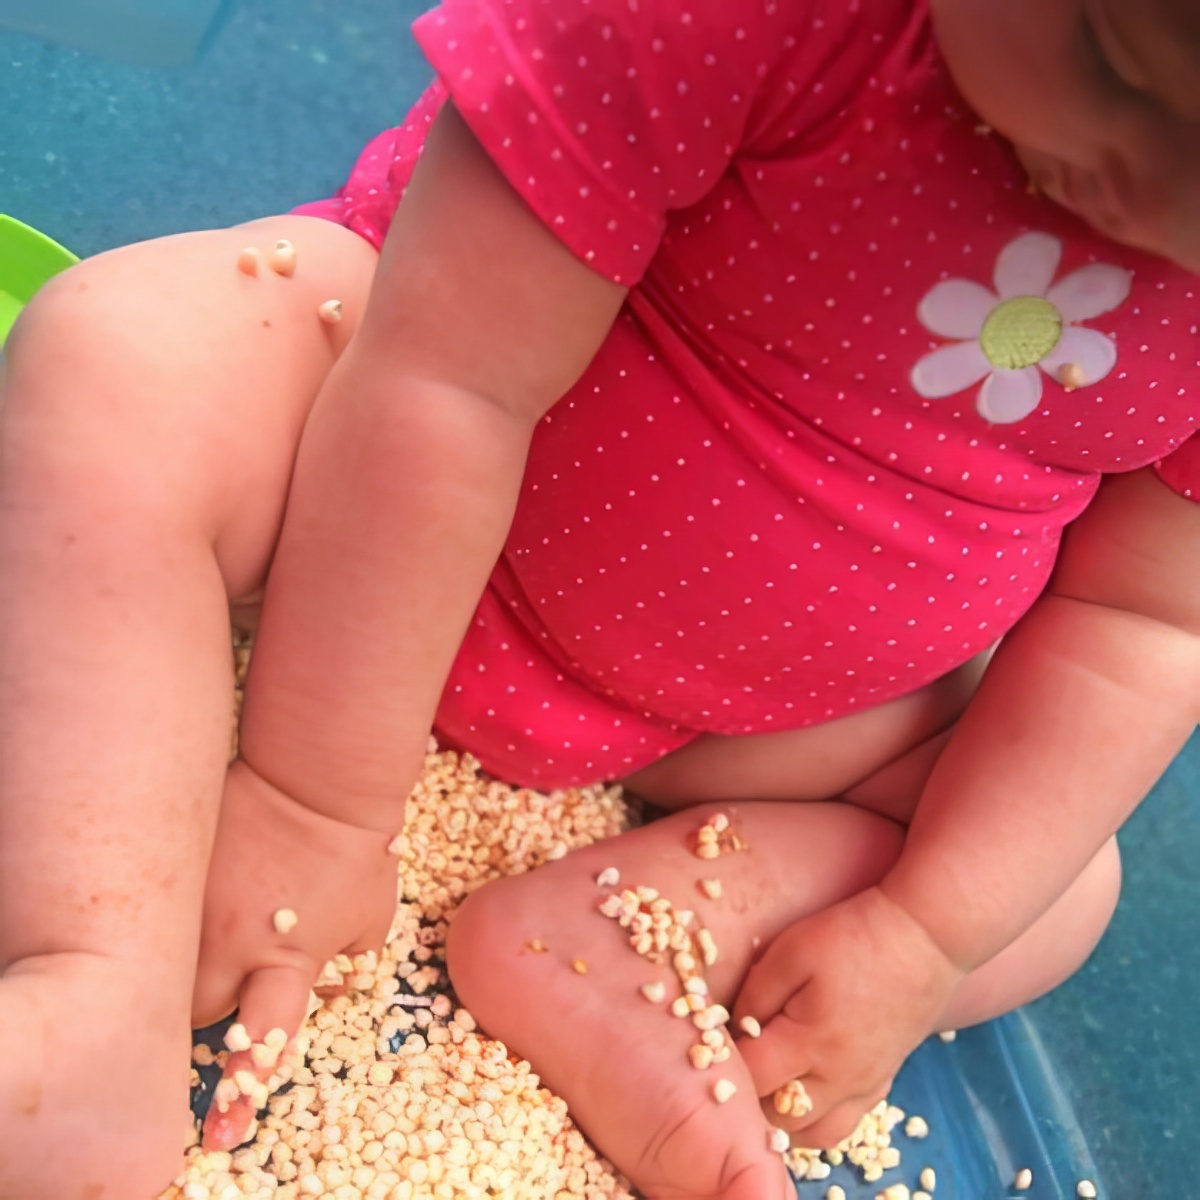 baby playing with cereal as sensory bins for preschoolers